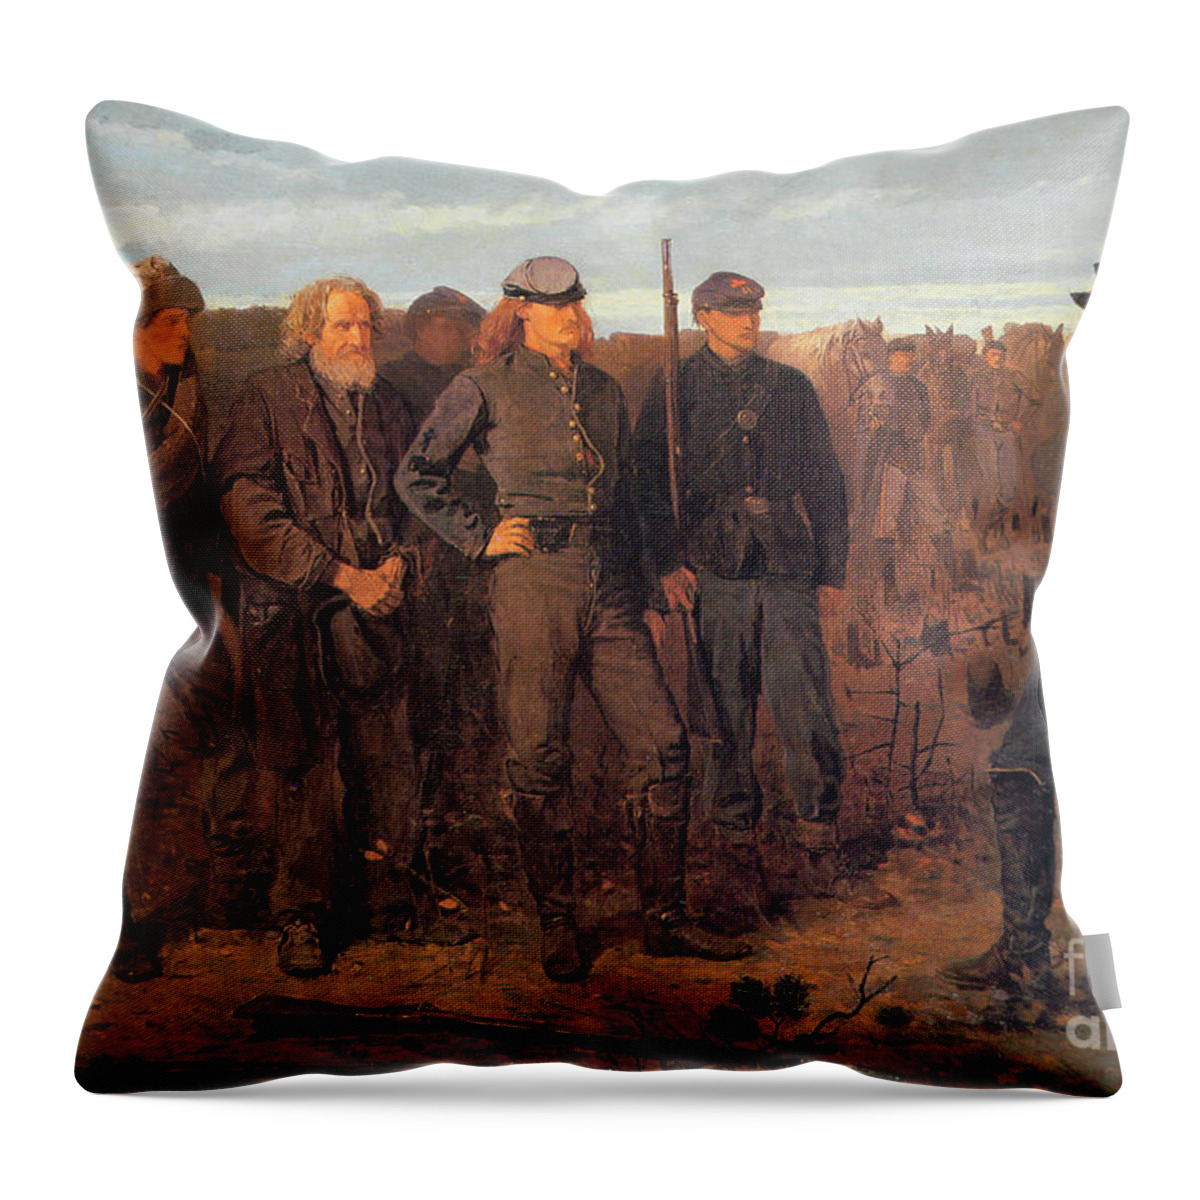 Prisoners From The Front Throw Pillow featuring the painting Prisoners from the Front by Winslow Homer